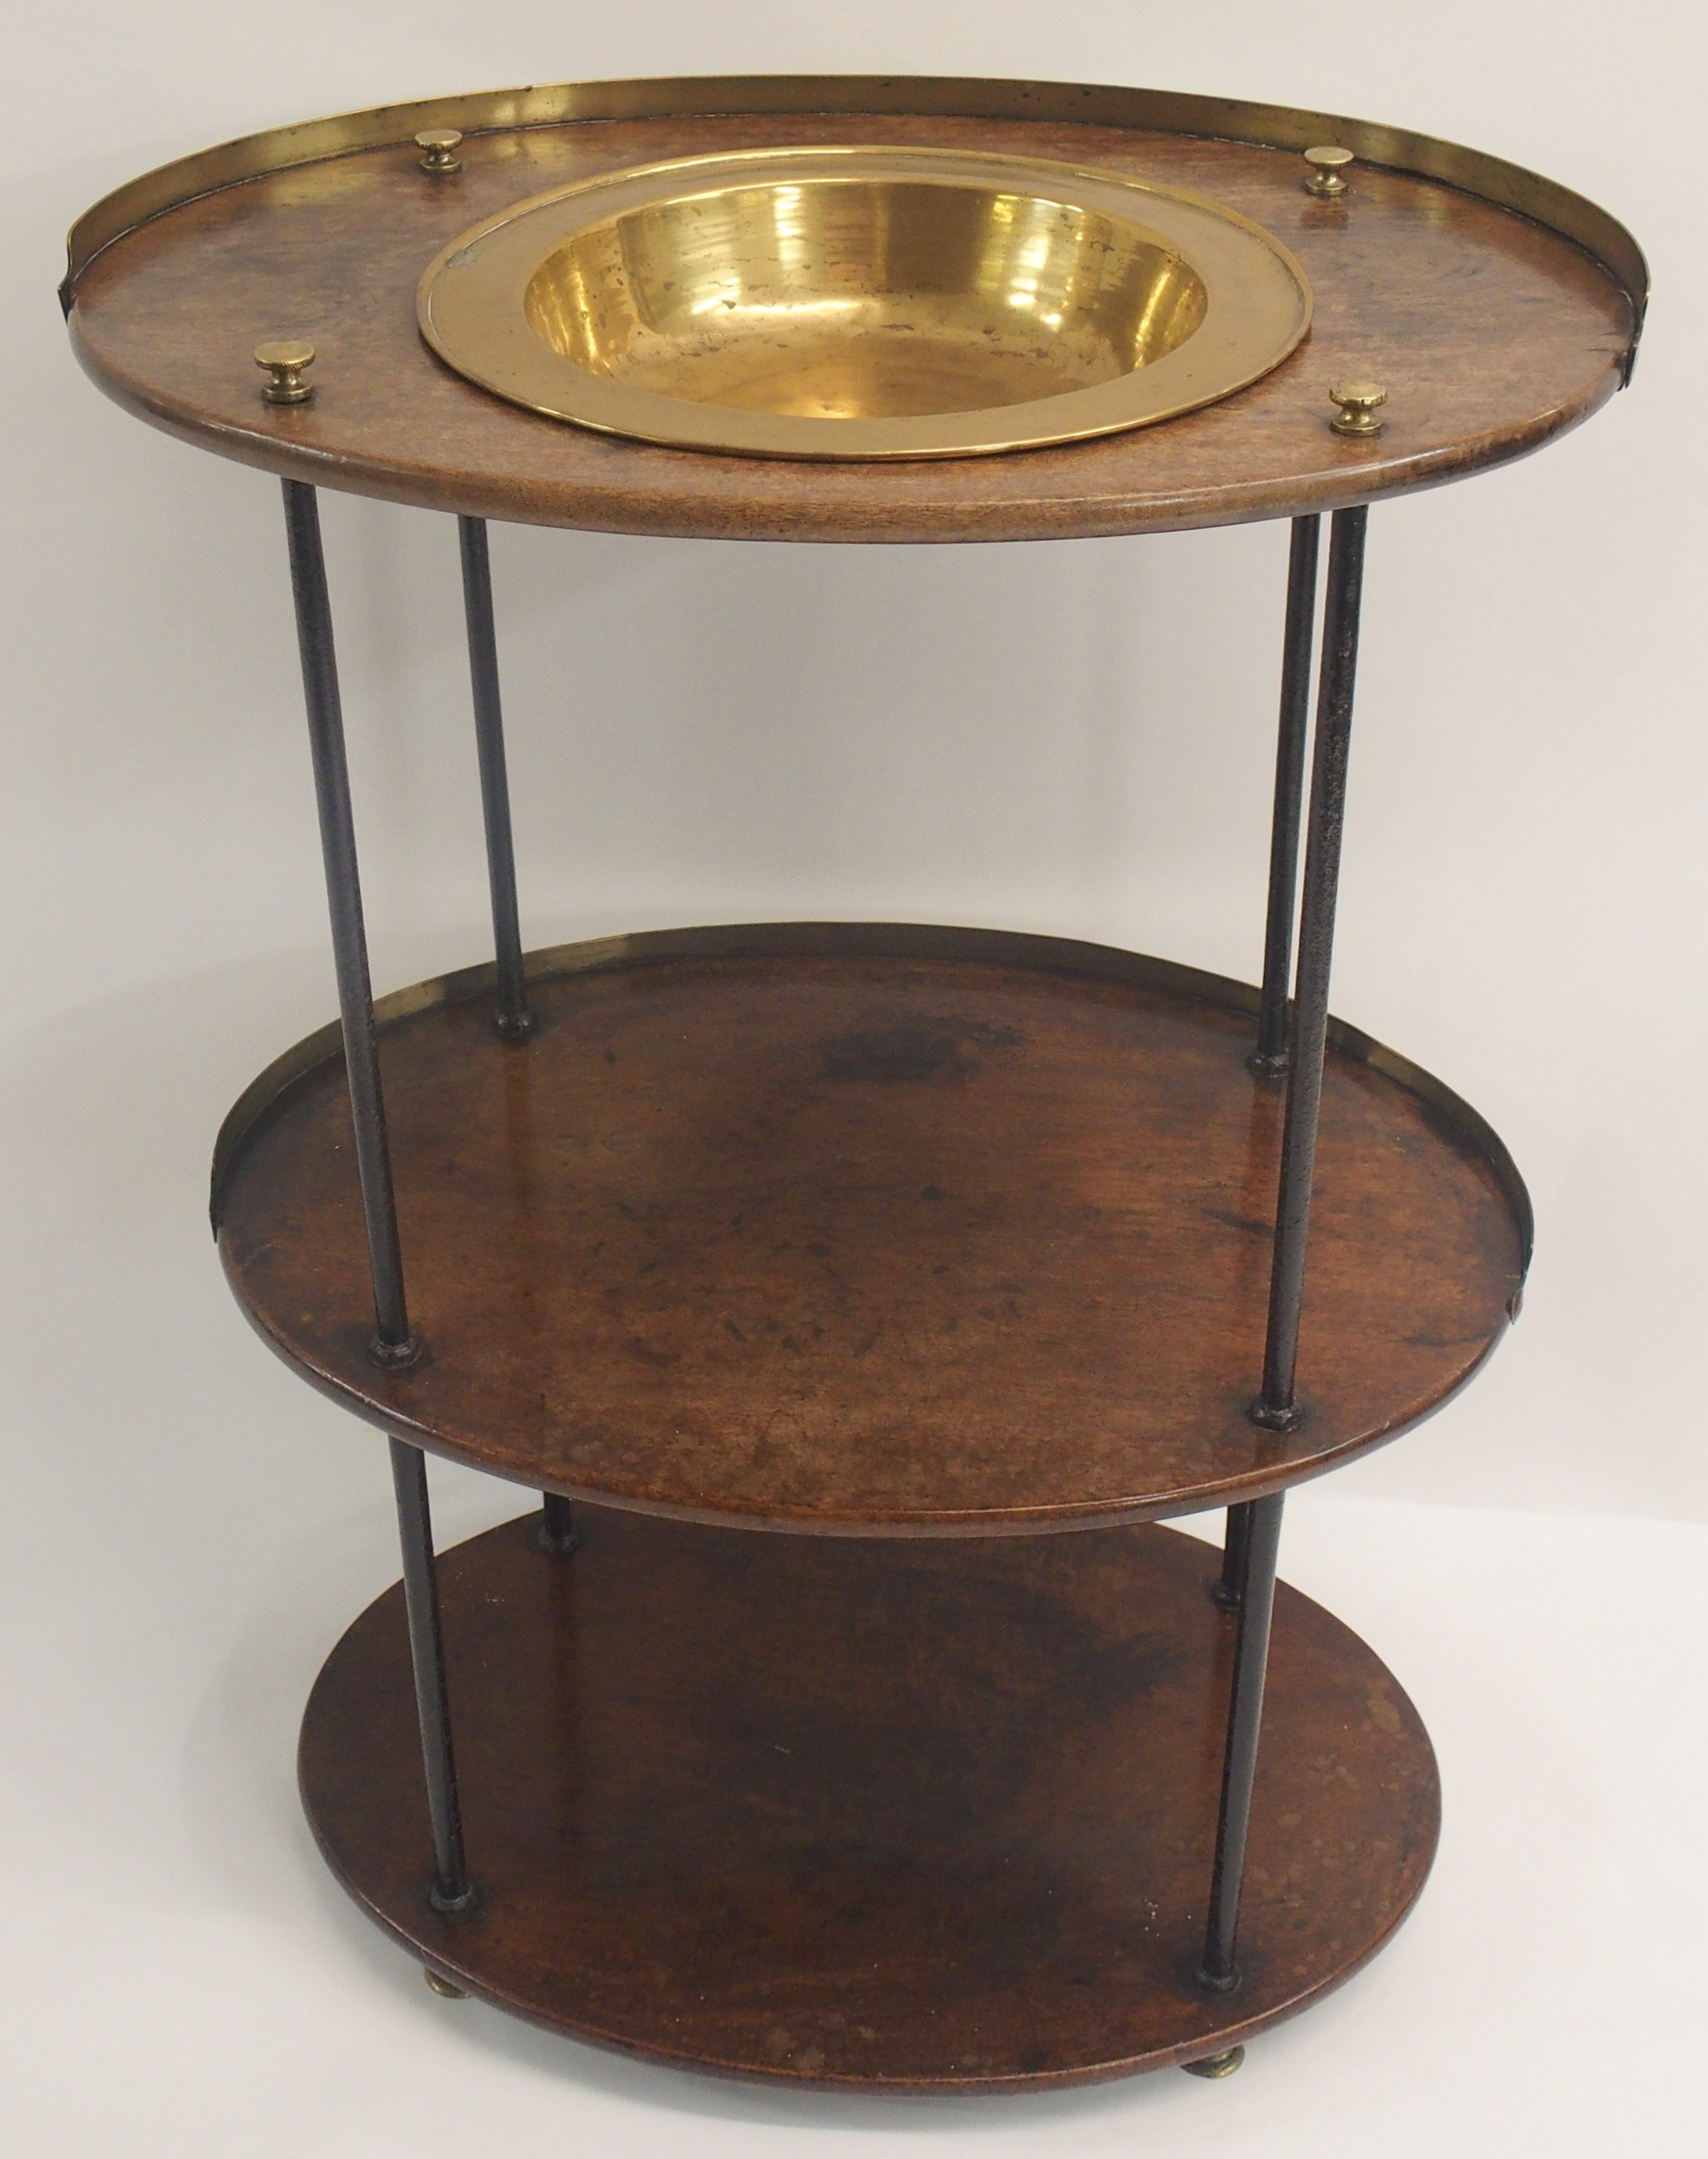 A 19TH CENTURY BRITISH MILITARY OFFICERS CAMPAIGN WASH STAND the three-tiered teak and brass mounted